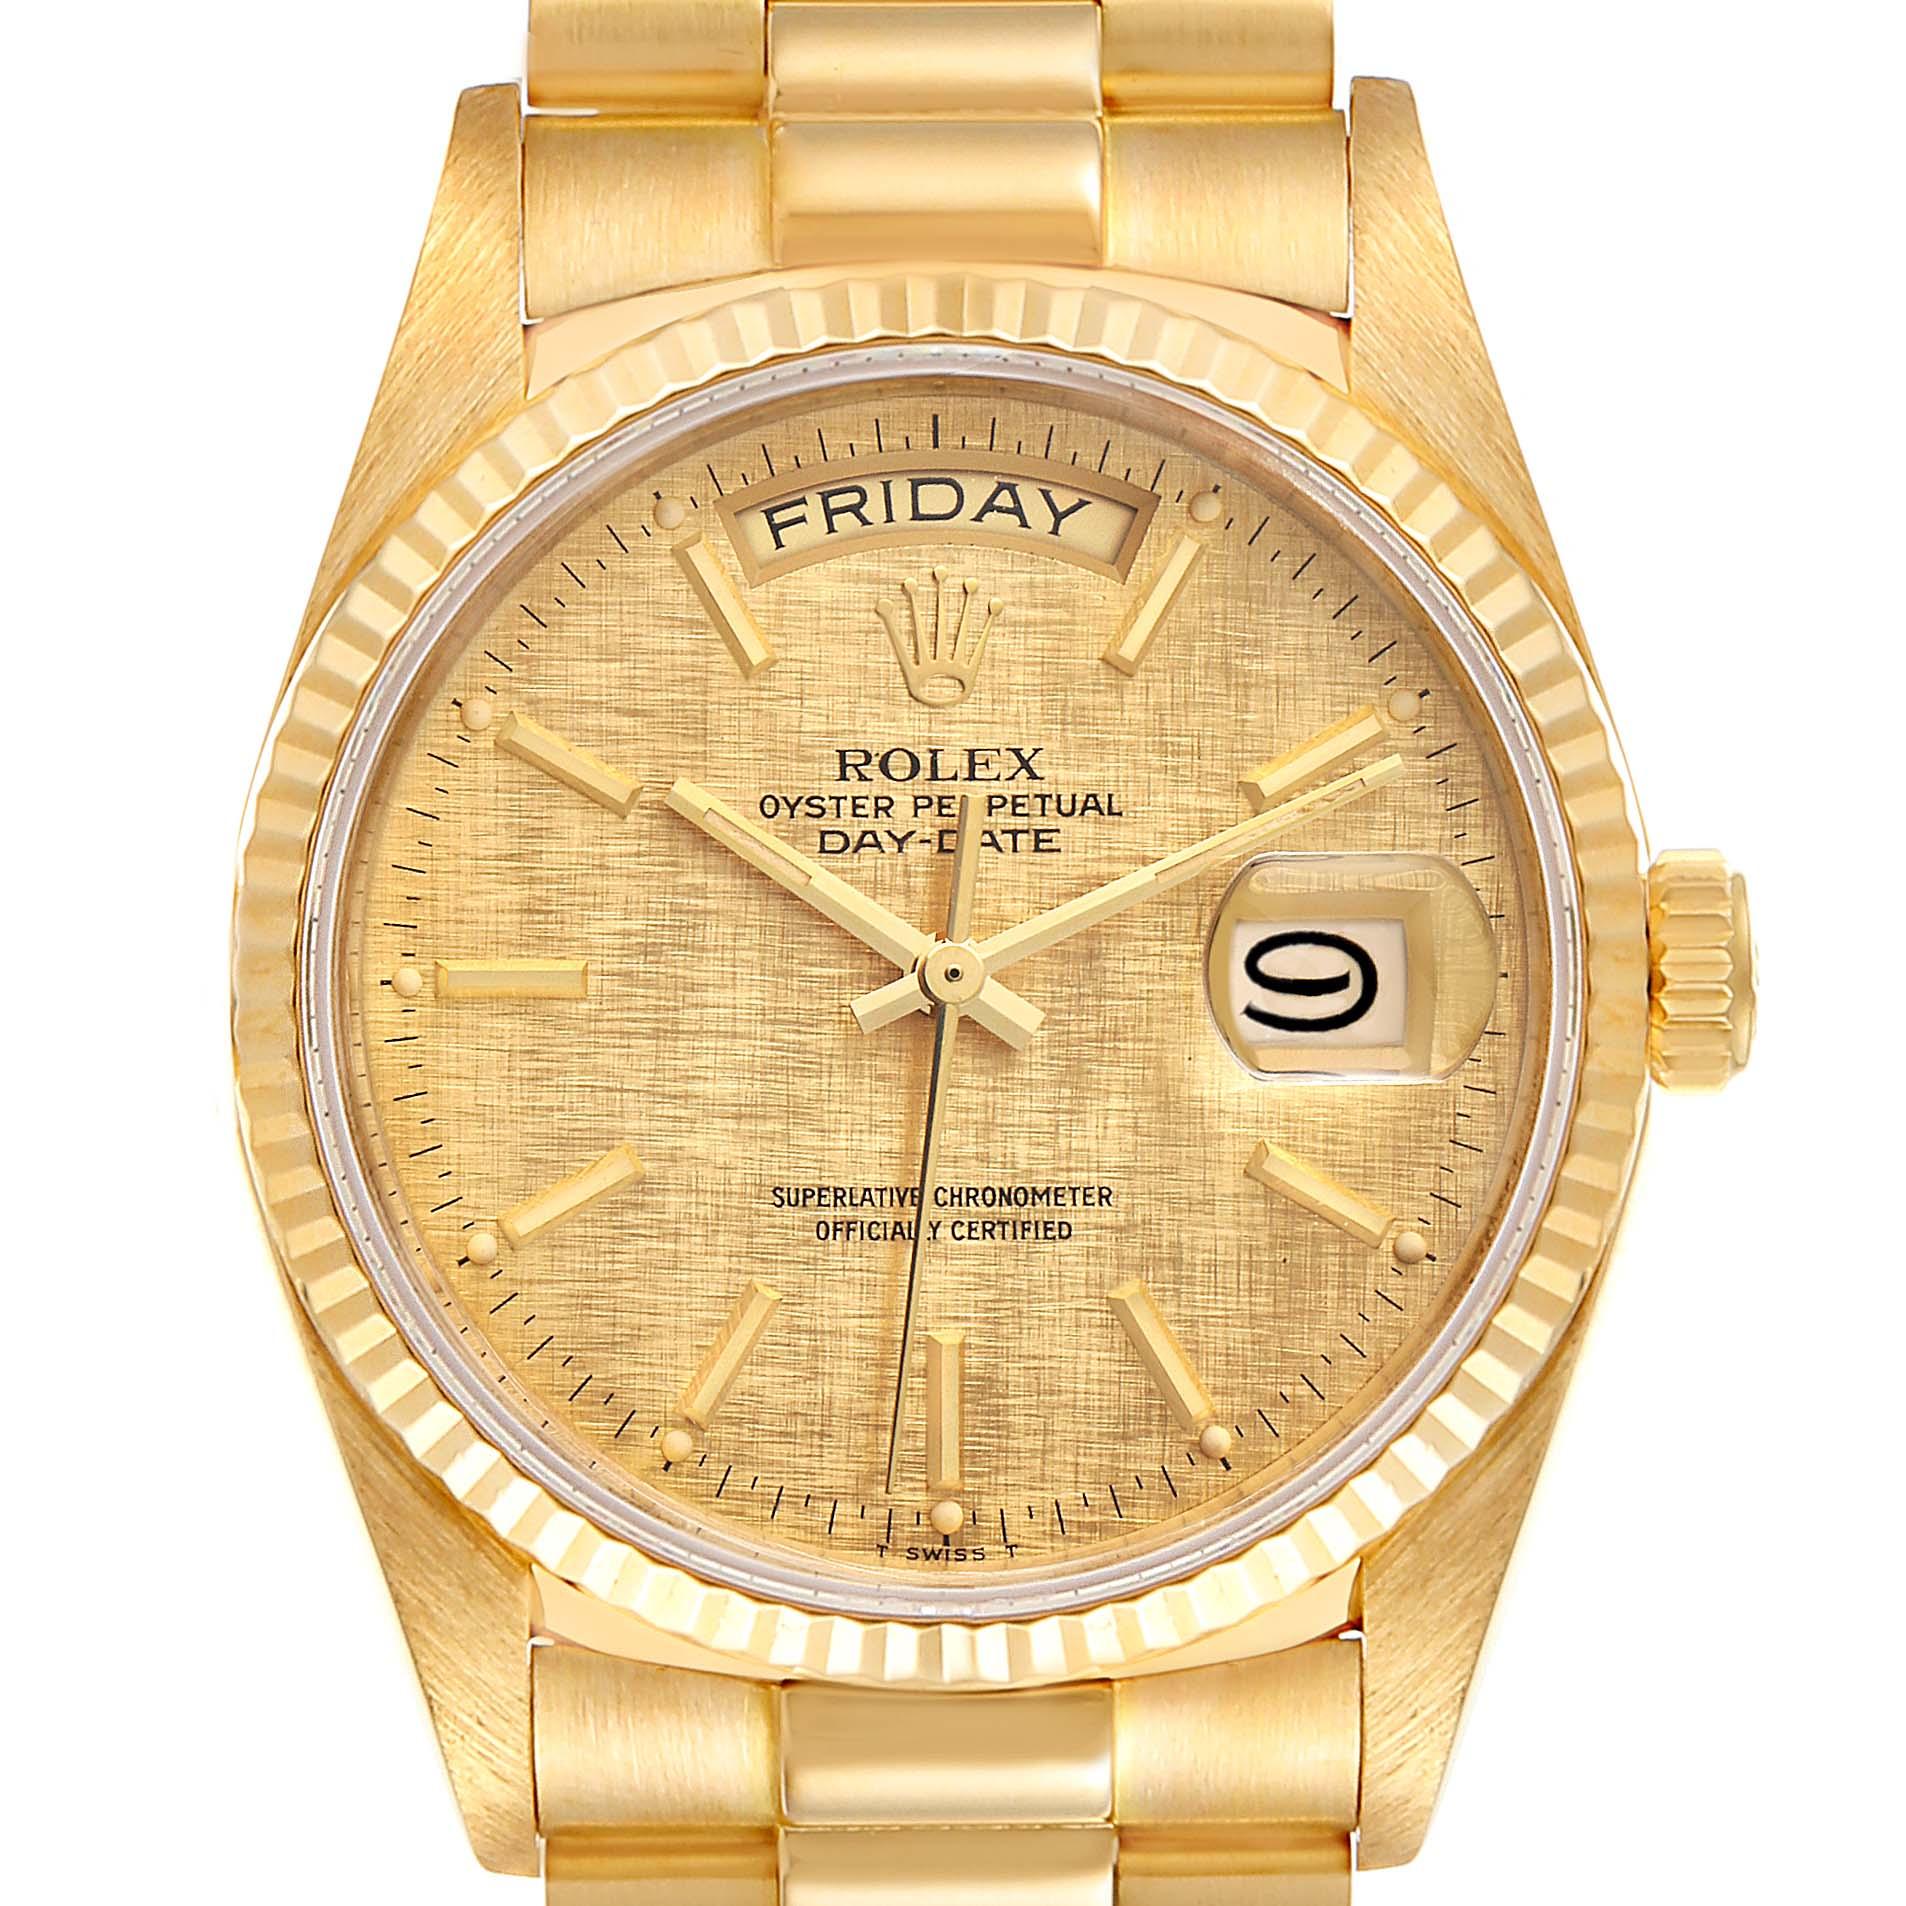 Rolex President Day-Date 36mm Yellow Gold Linen Dial Mens Watch 18038. Officially certified chronometer self-winding movement. 18k yellow gold oyster case 36.0 mm in diameter. Rolex logo on a crown. 18k yellow gold fluted bezel. Scratch resistant